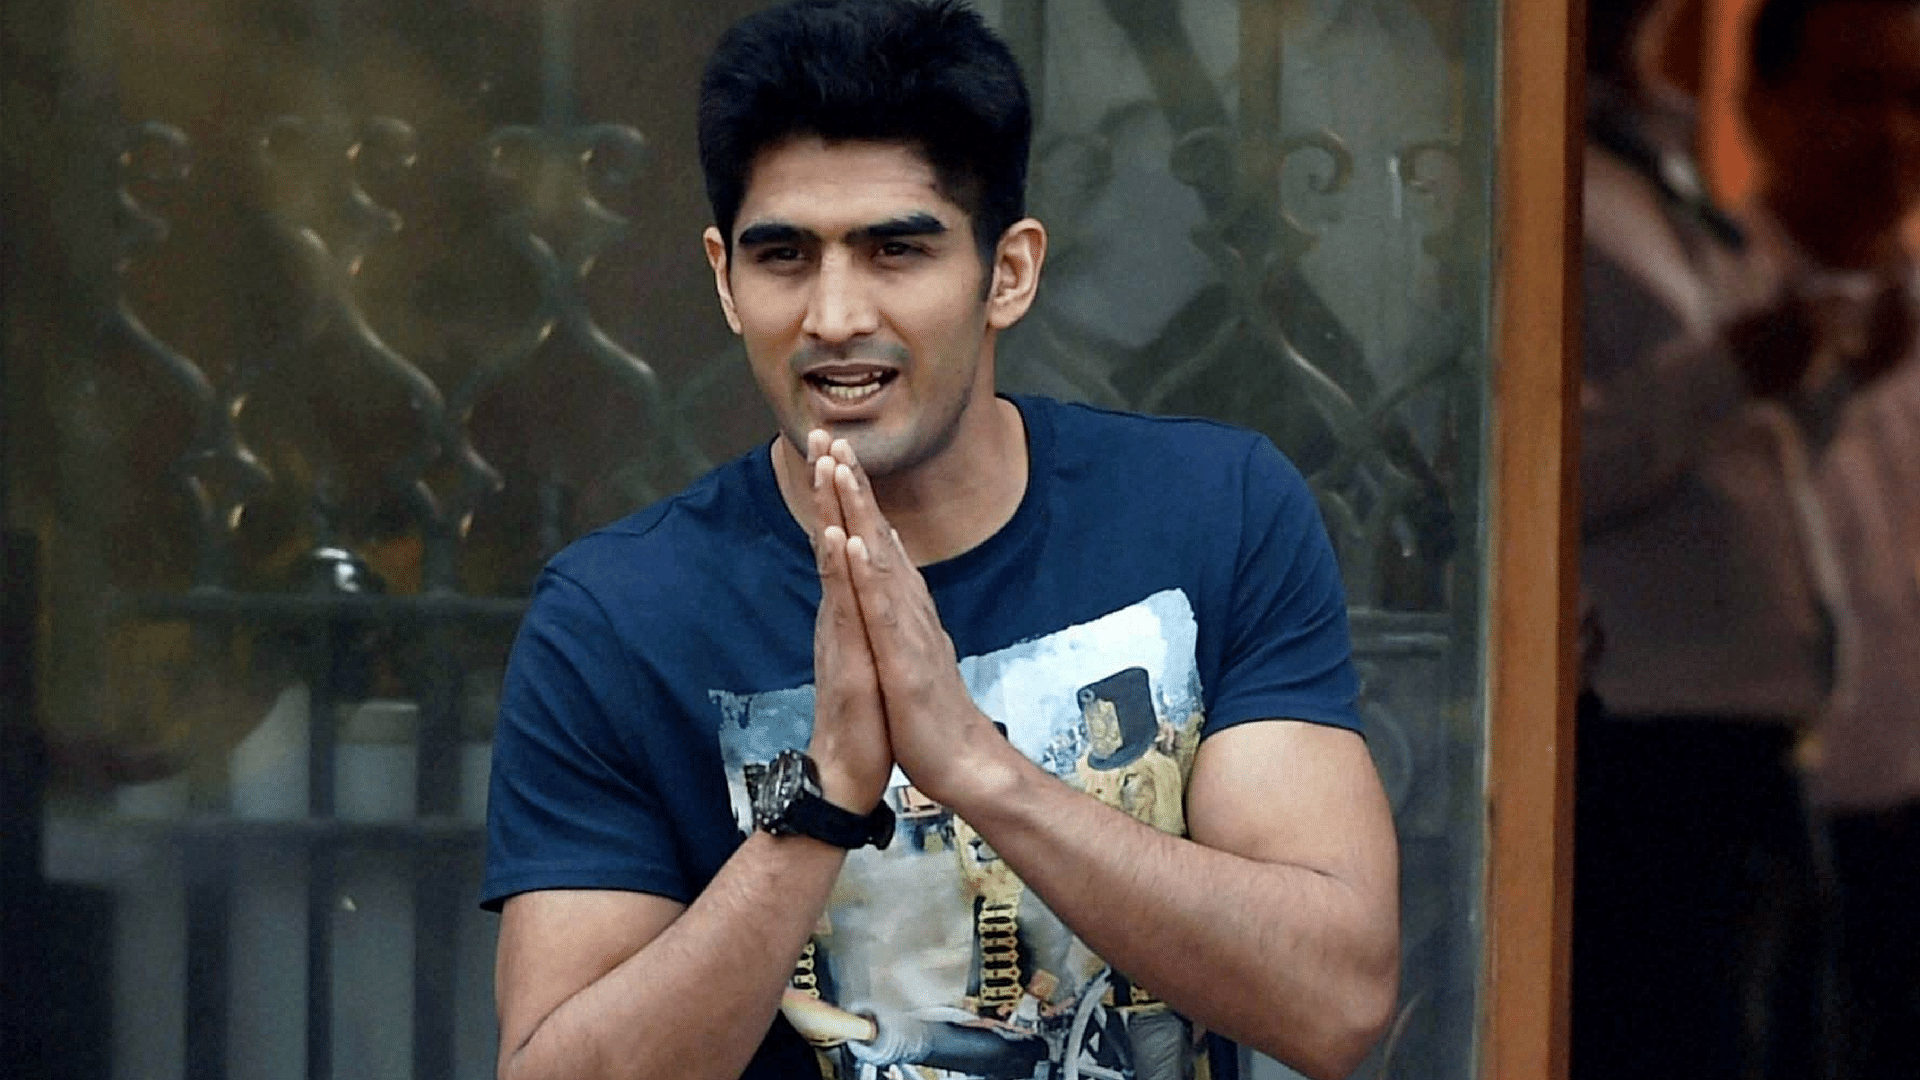 Olympian-turned-professional boxer Vijender Singh greets well-wishers and the press